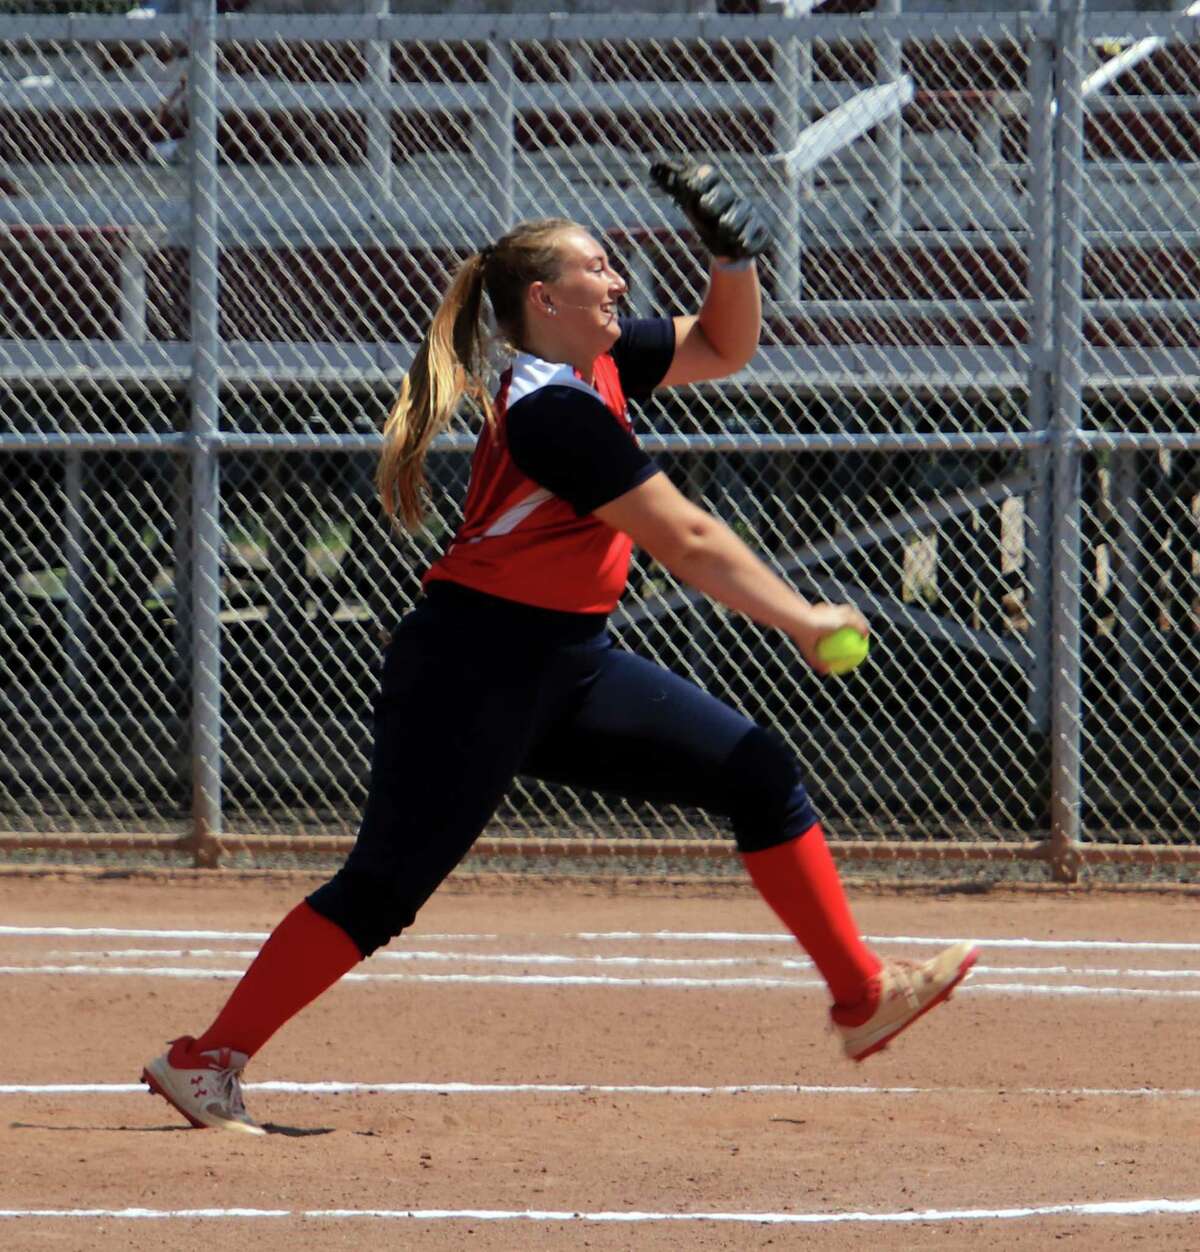 Pitcher Ali DuBois, seen here in 2020, and the Brakettes softball team were crowned WMS national champions on Sunday.